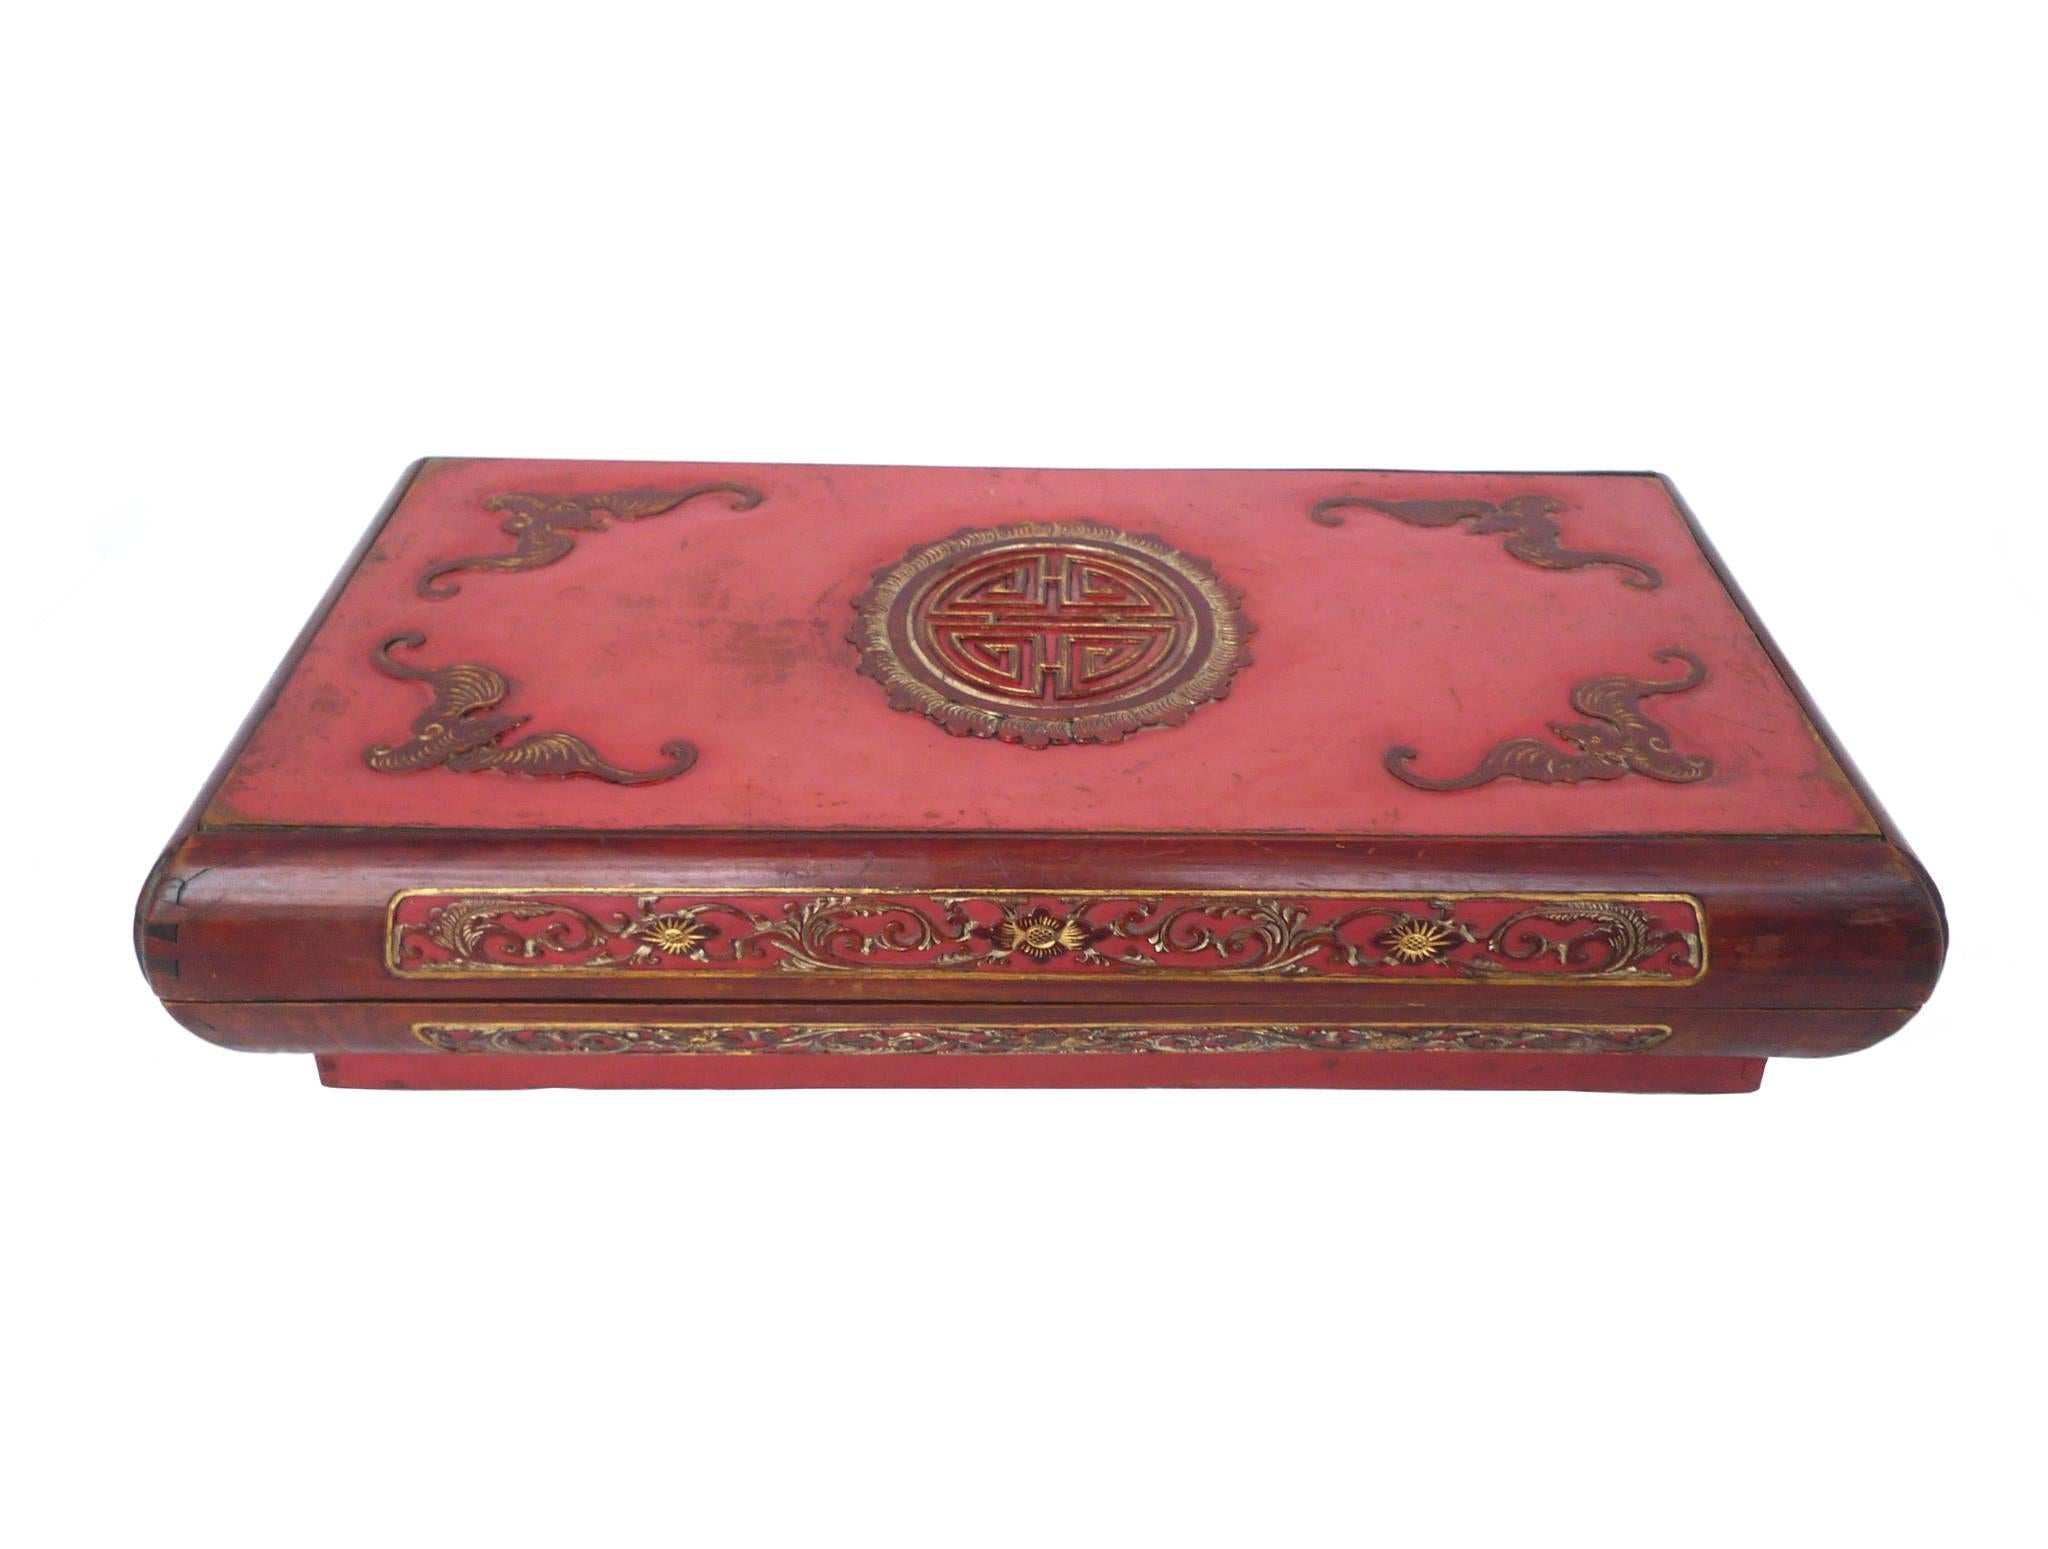 These Chinese scholar boxes were created in the early 20th century. Their palette is a rich spectrum of reds, varying in texture and finishes. The beautiful carved decorations include a floral frieze on the sides and four bats on atop each lid, with